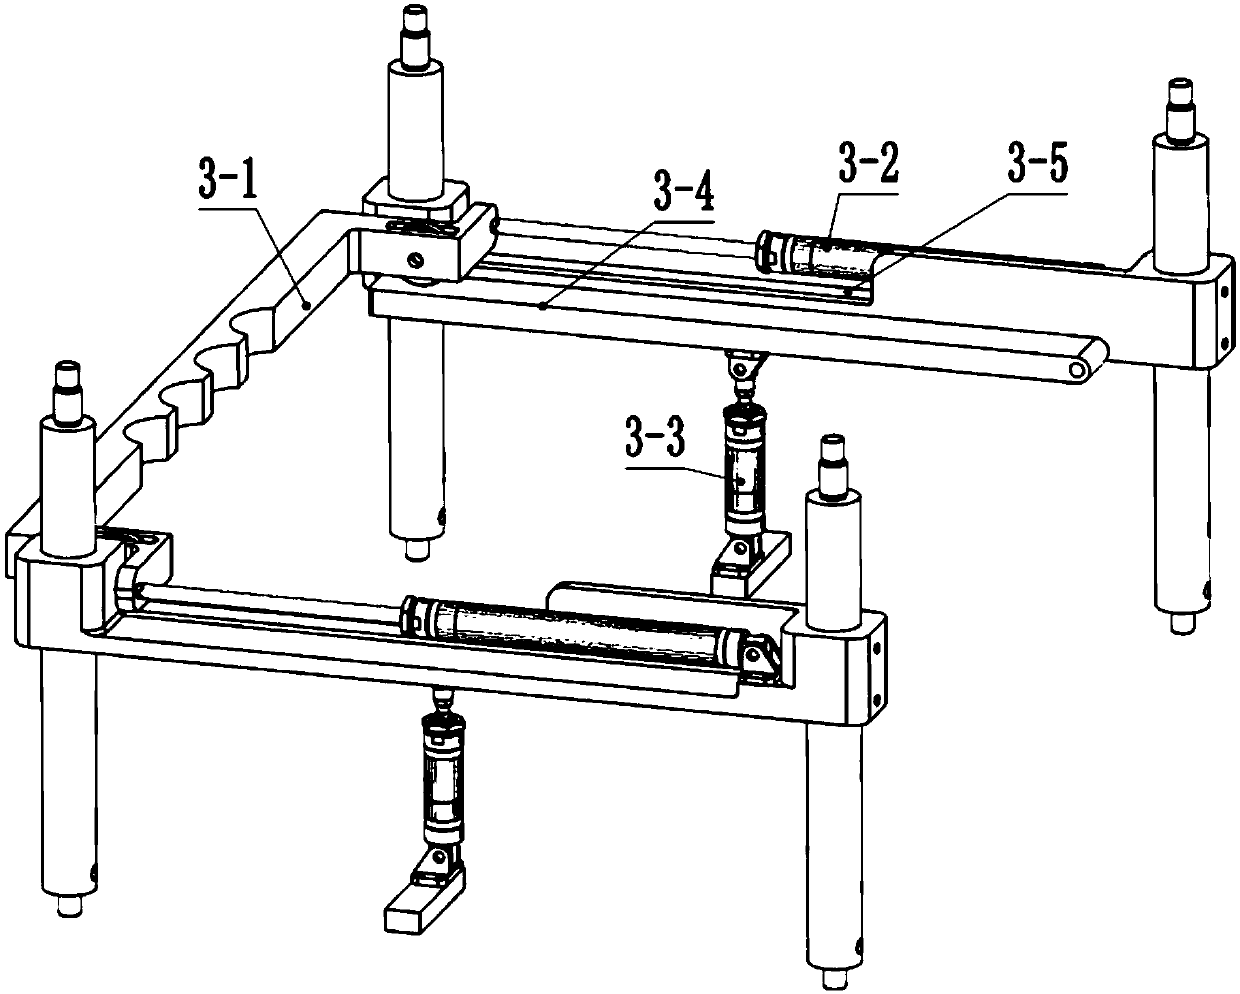 Glass forming press